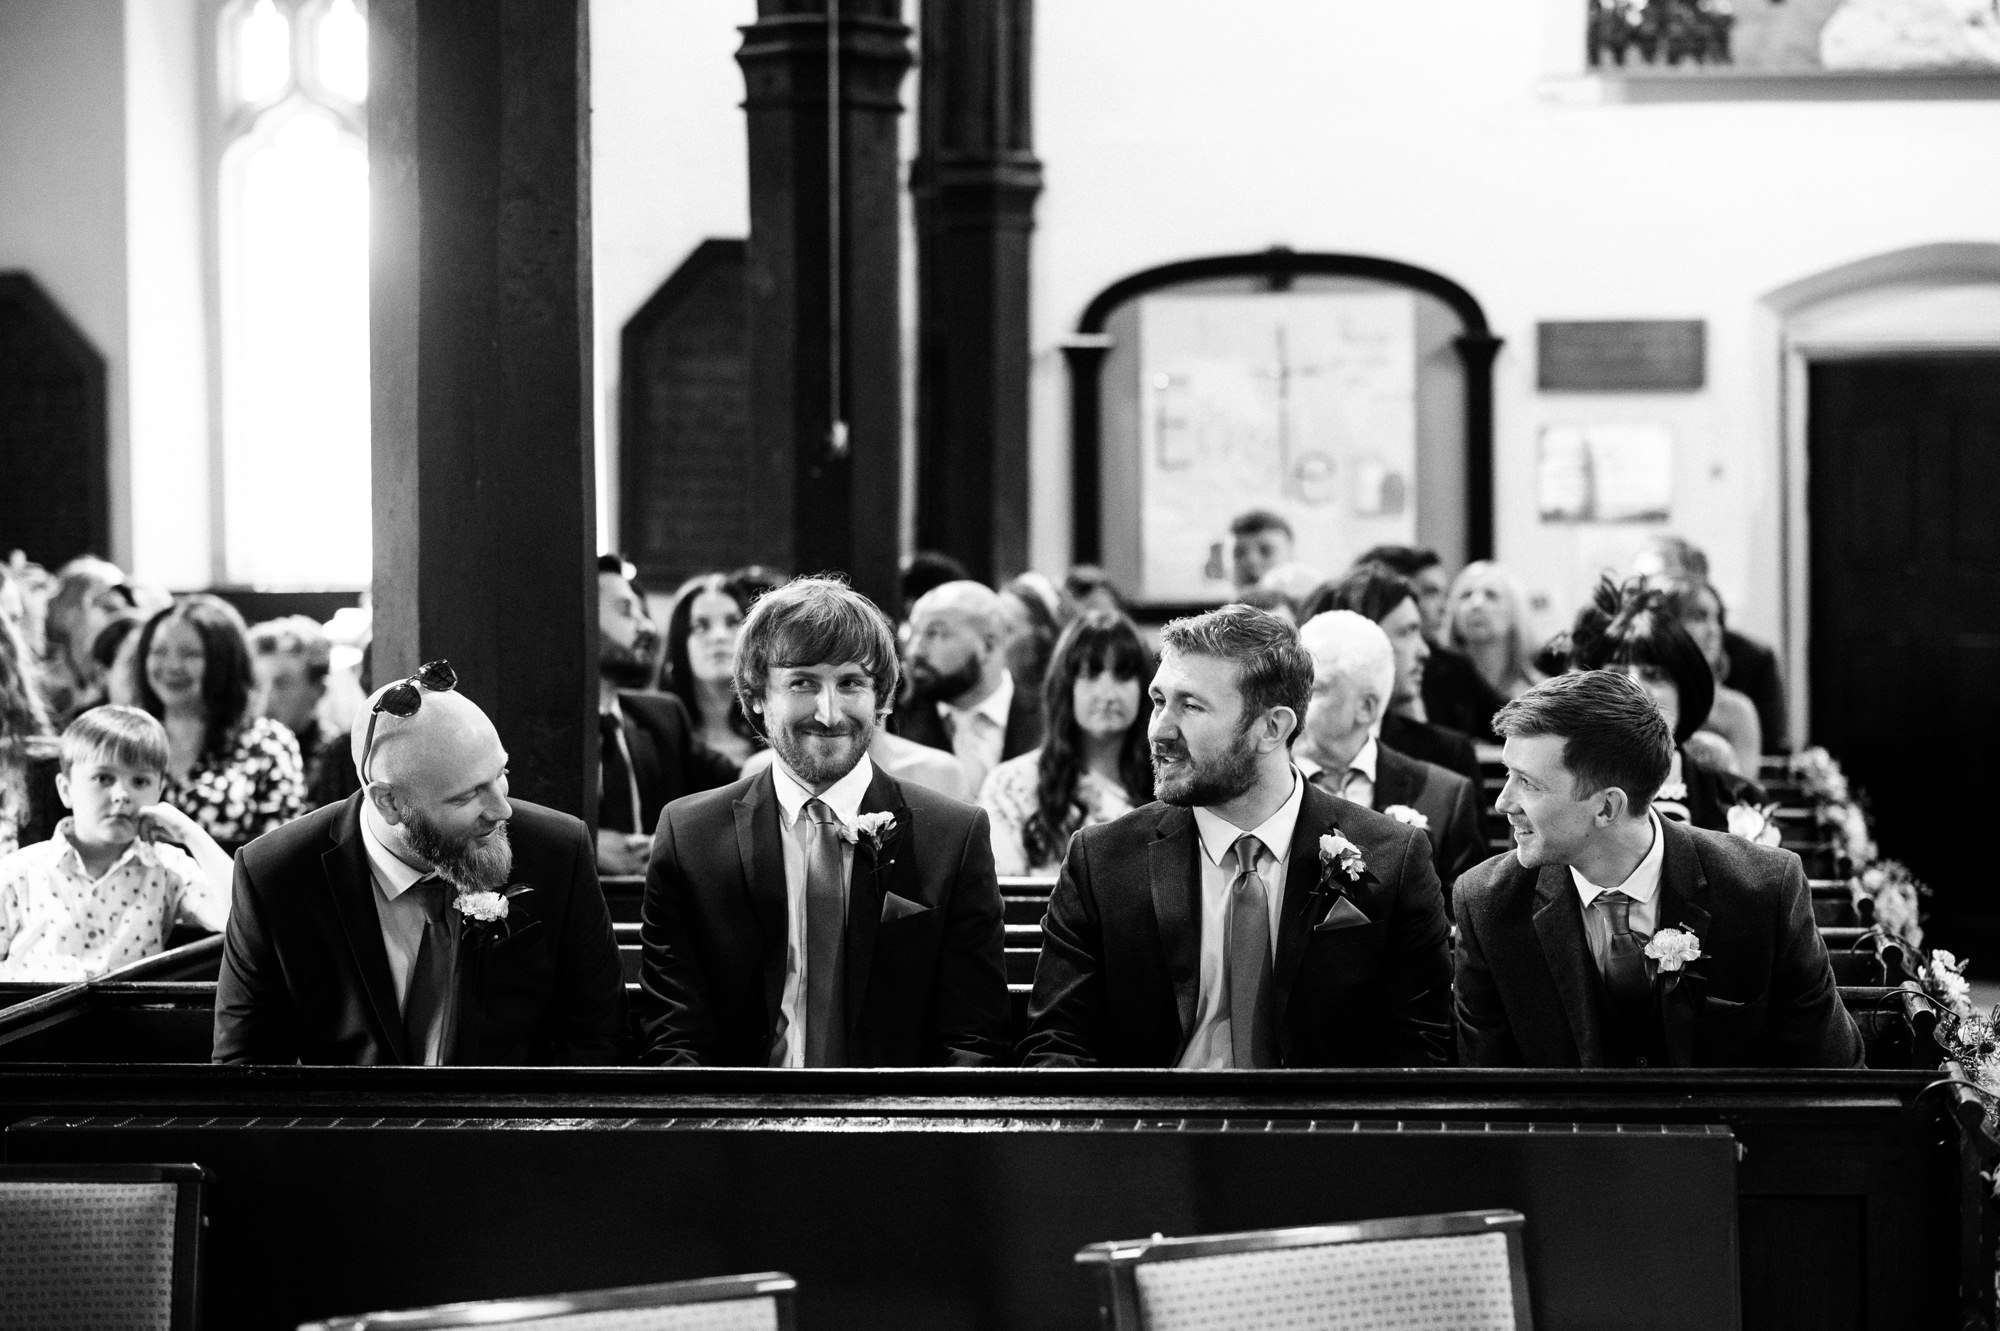 groom and groomsmen sat together at the front of the church